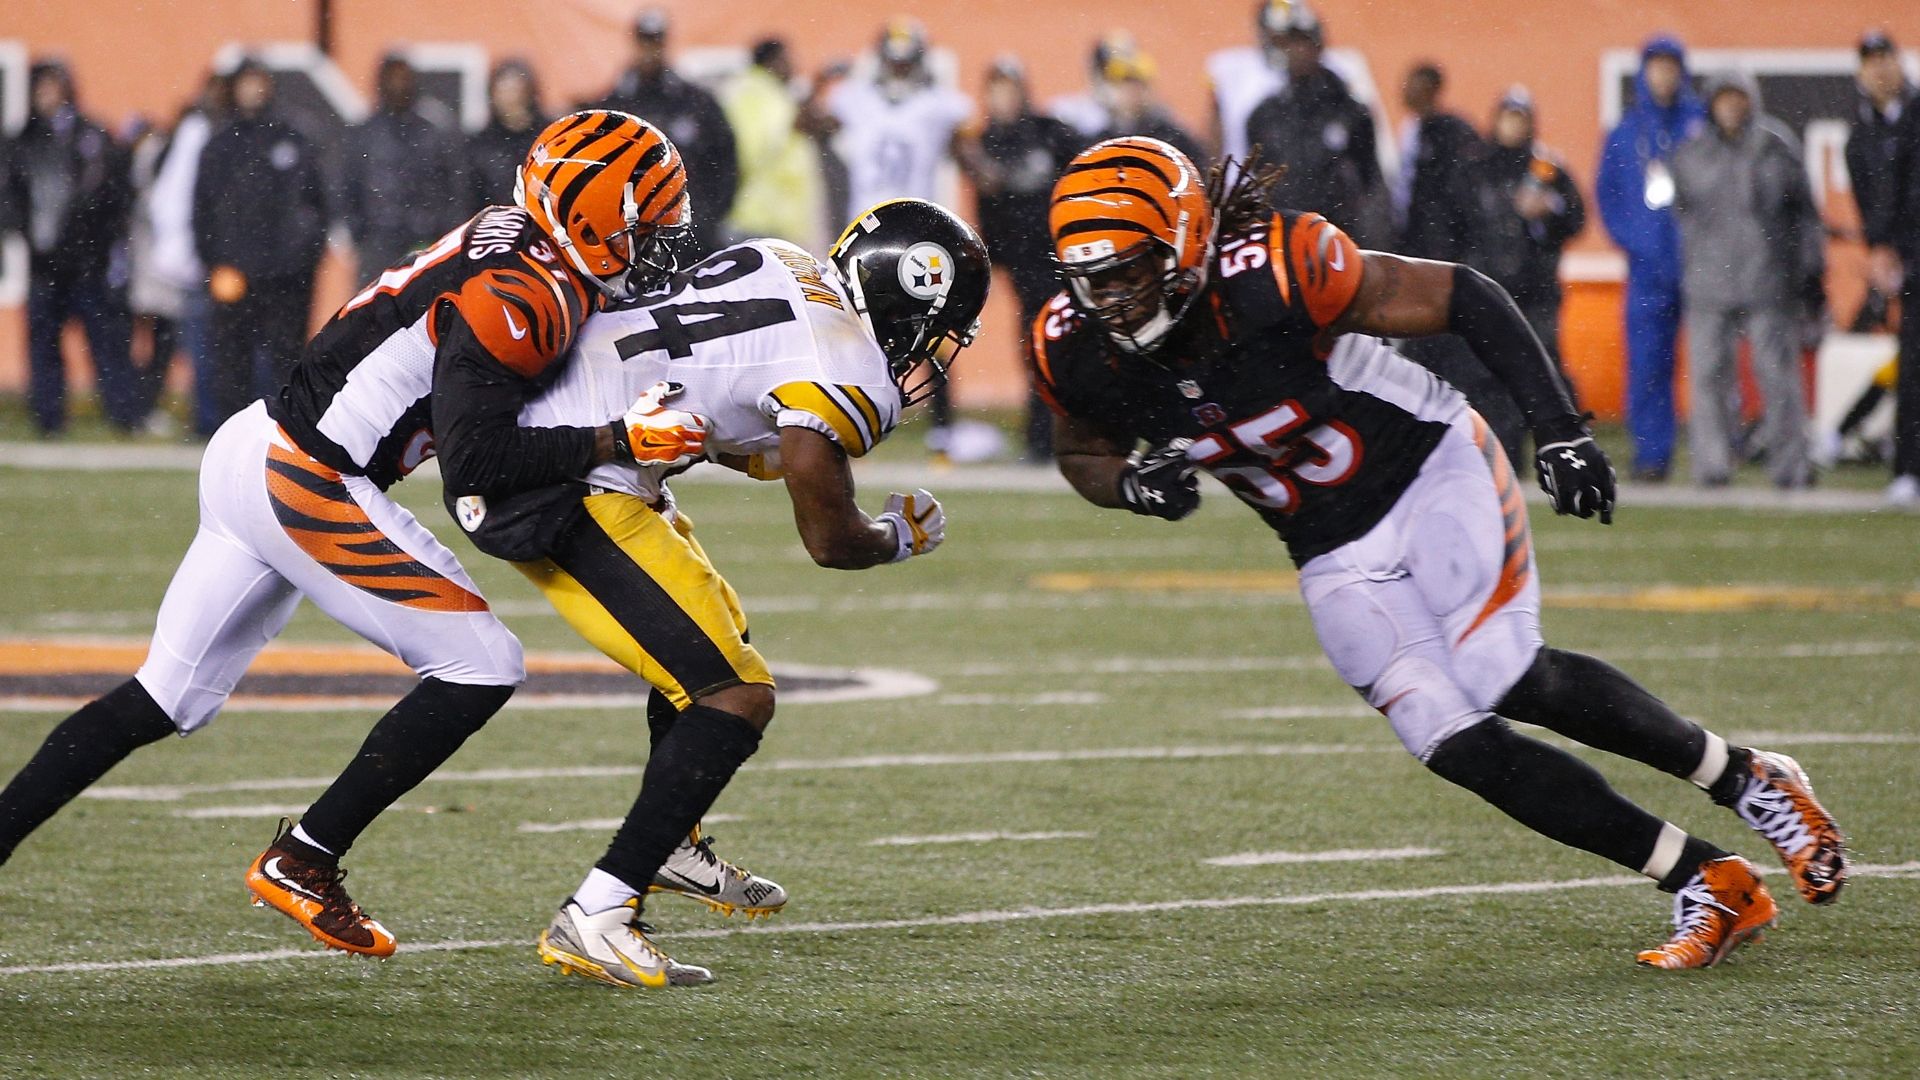 Burfict meets with Goodell about on-field behavior